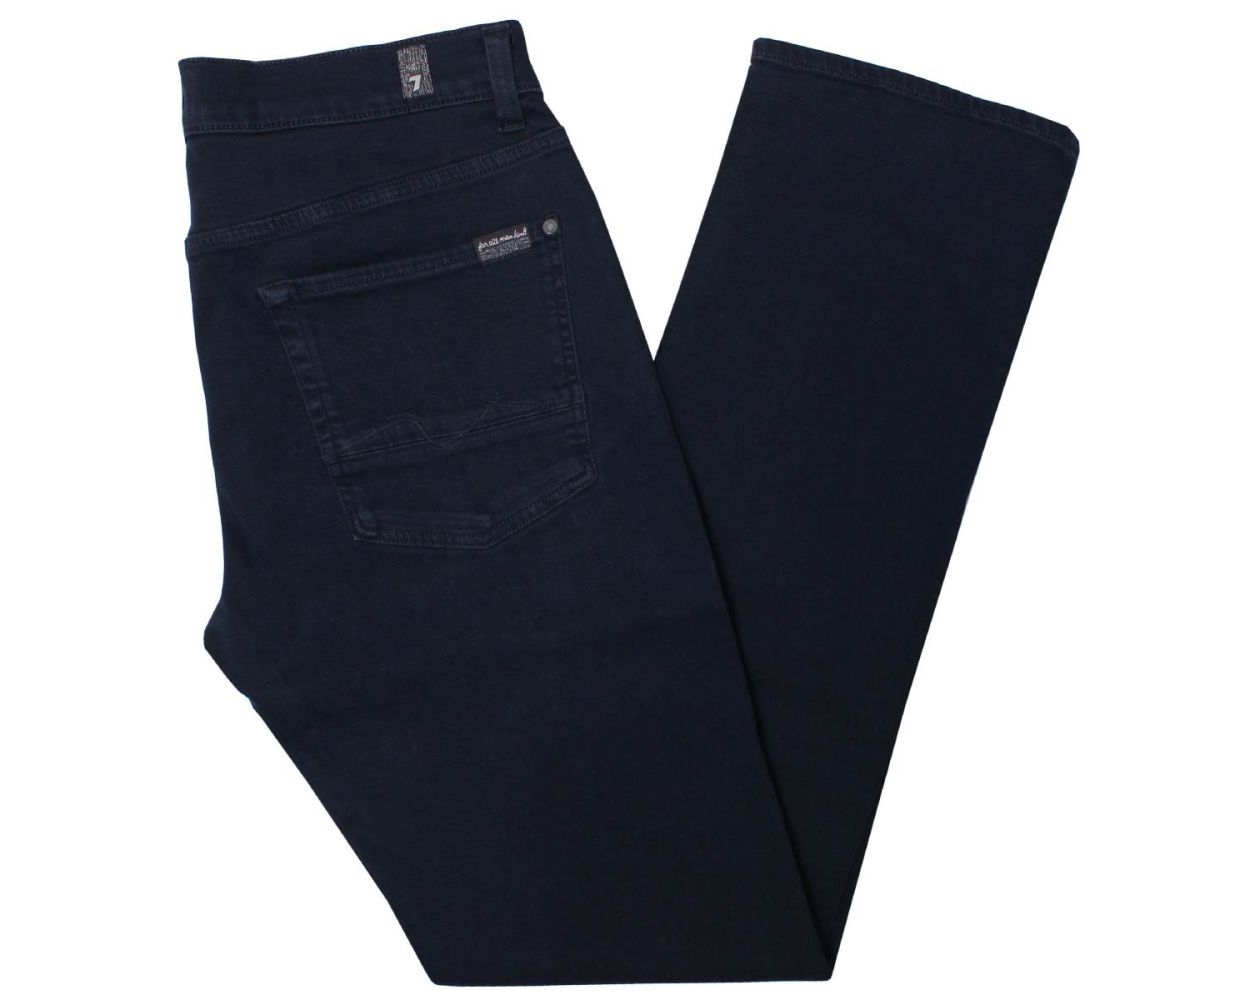 for all mankind slimmy jeans